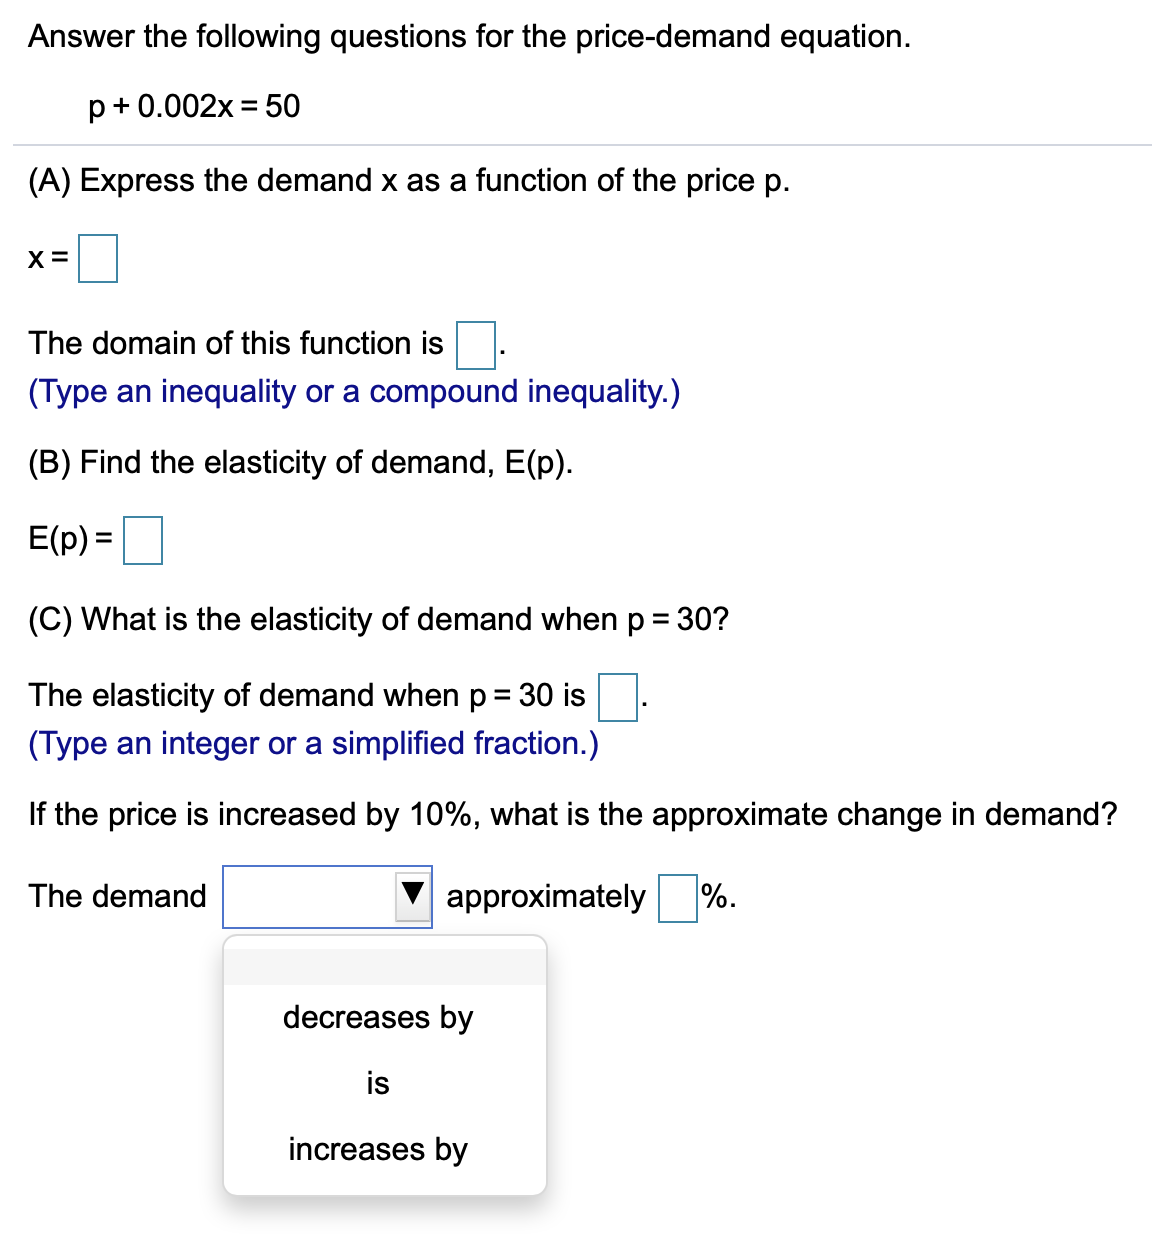 Answer the following questions for the price-demand equation.
p+0.002x = 50
(A) Express the demand x as a function of the price p.
X =
The domain of this function is
(Type an inequality or a compound inequality.)
(B) Find the elasticity of demand, E(p).
E(p) =|
(C) What is the elasticity of demand when p = 30?
%3D
The elasticity of demand when p = 30 is
(Type an integer or a simplified fraction.)
If the price is increased by 10%, what is the approximate change in demand?
The demand
V approximately
%.
decreases by
is
increases by
